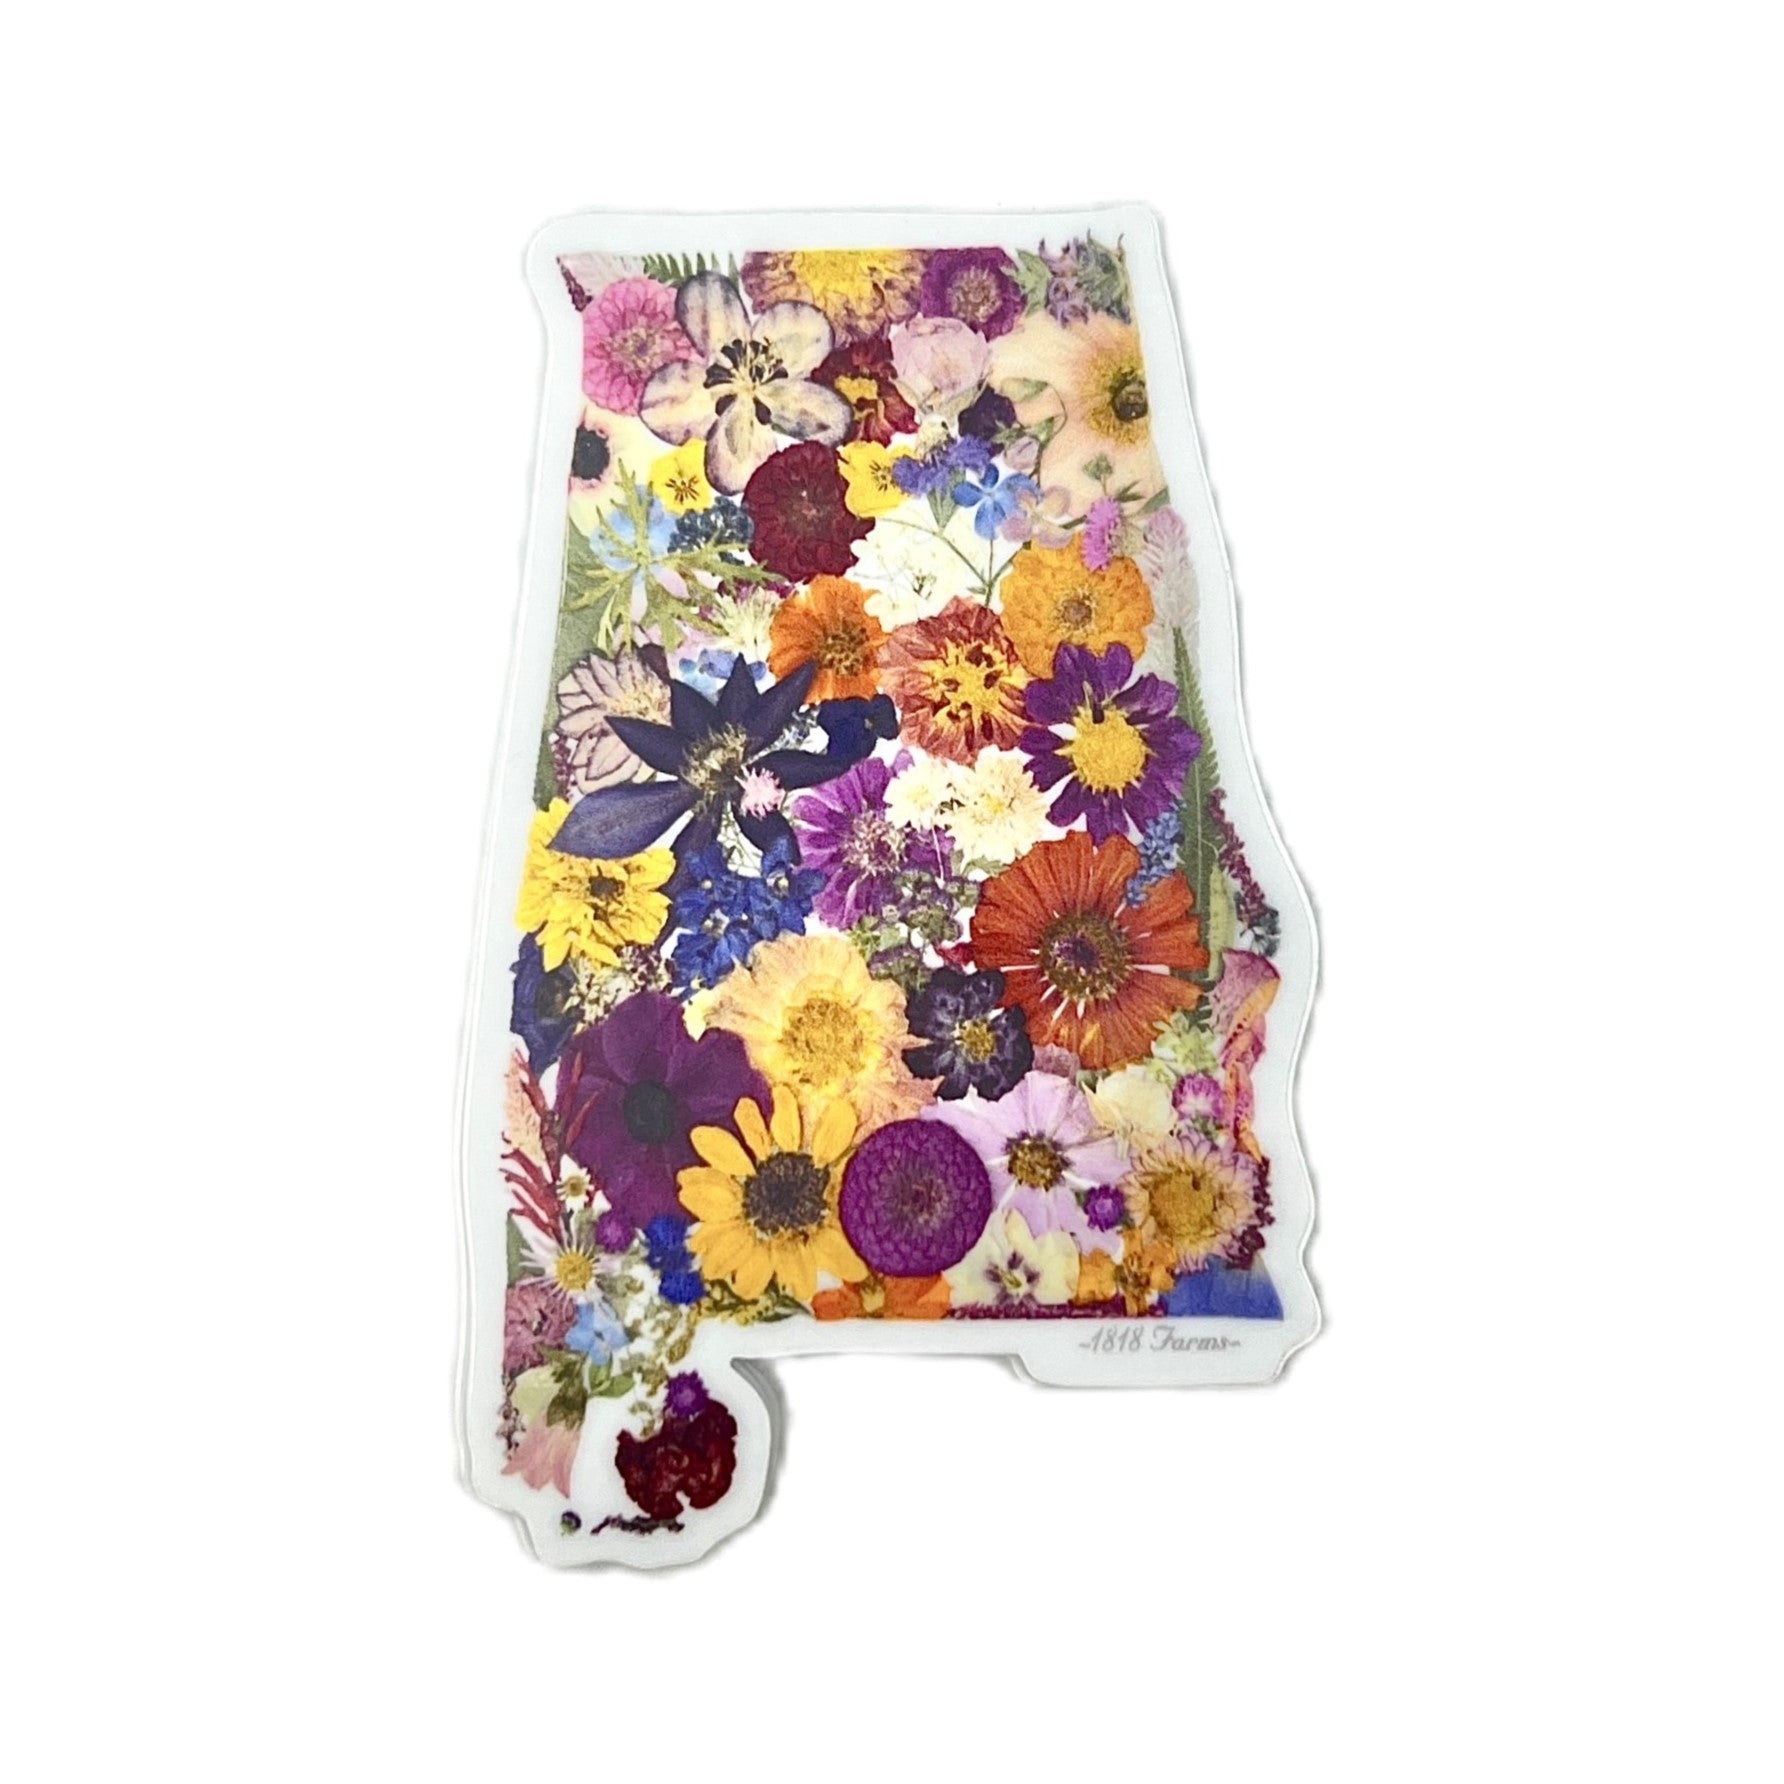 State Themed Vinyl Sticker Featuring Dried, Pressed Flowers - "Where I Bloom" Collection Vinyl Sticker 1818 Farms Alabama  